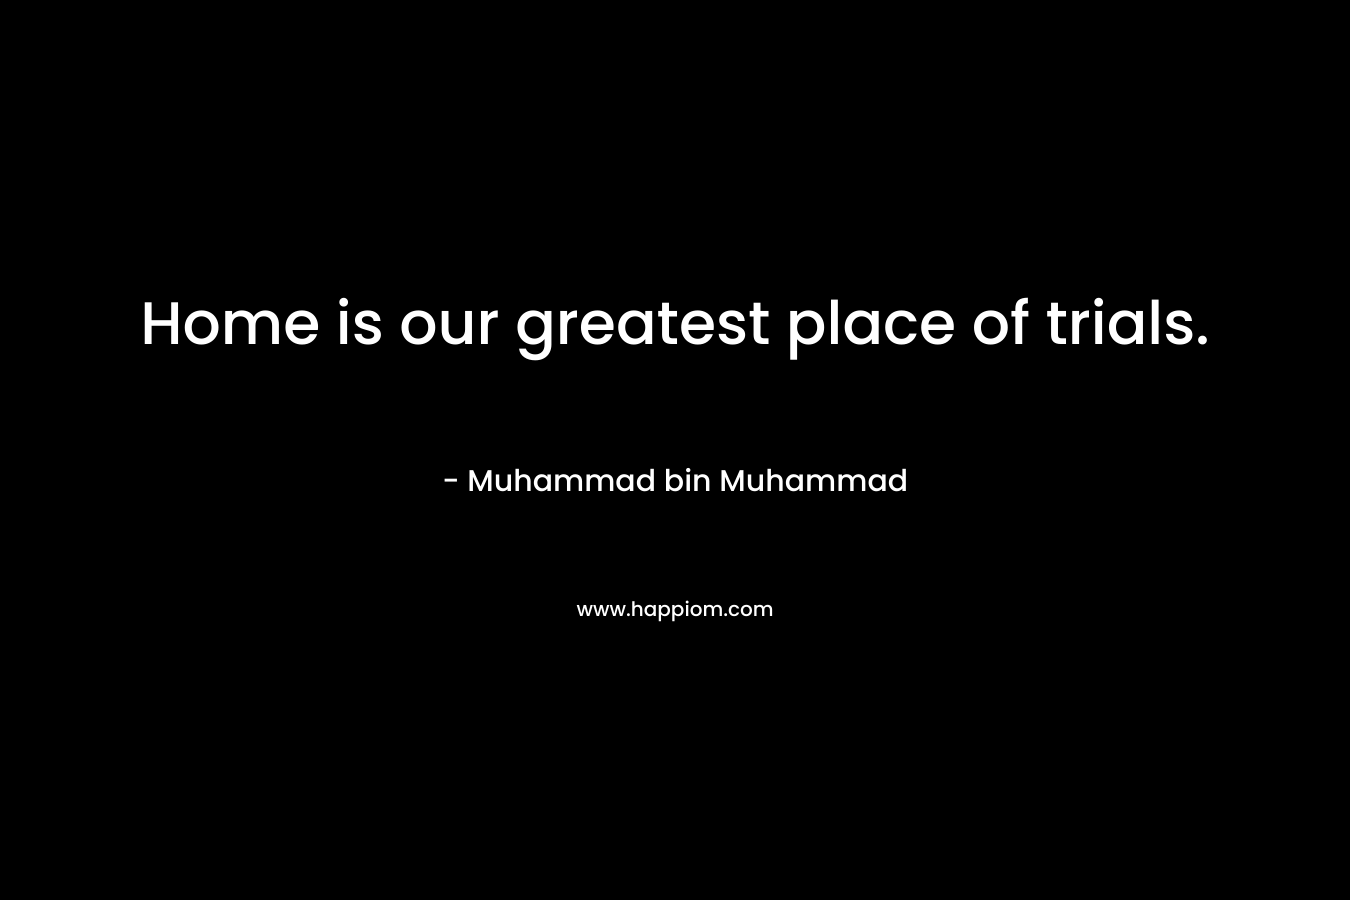 Home is our greatest place of trials.